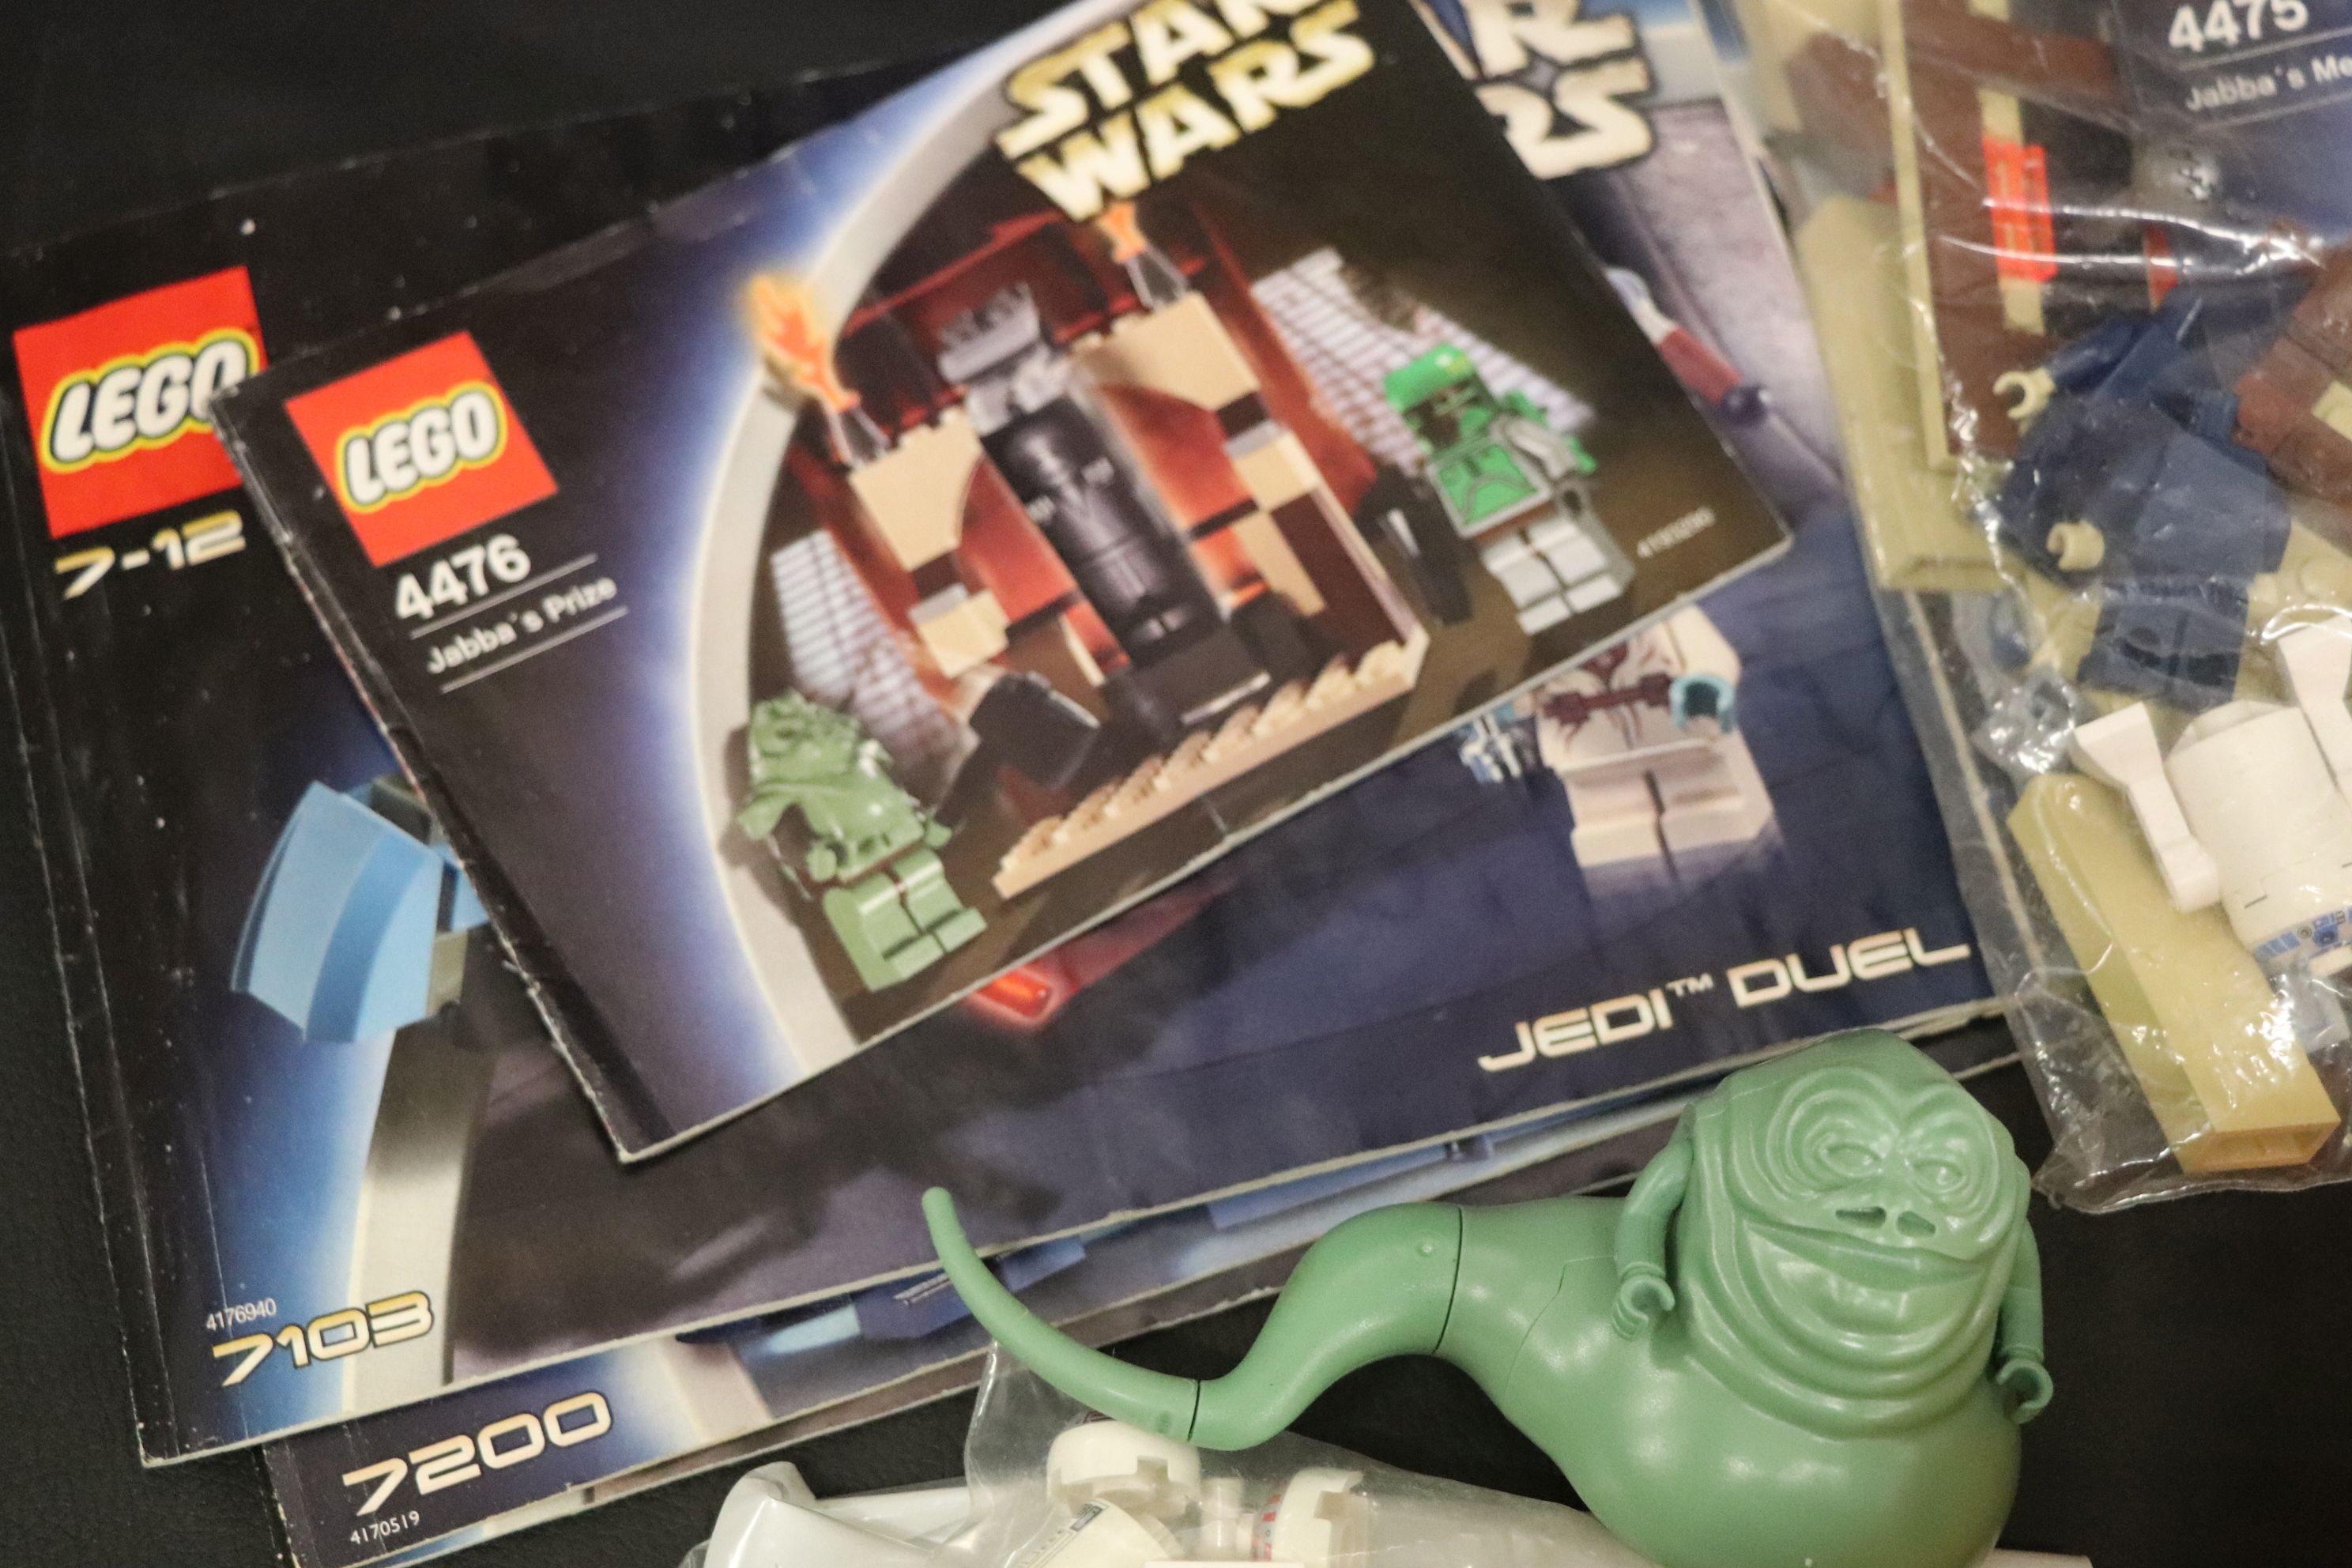 Group of Star Wars Lego to include mini figures and Jabba The Hutt - Image 2 of 8